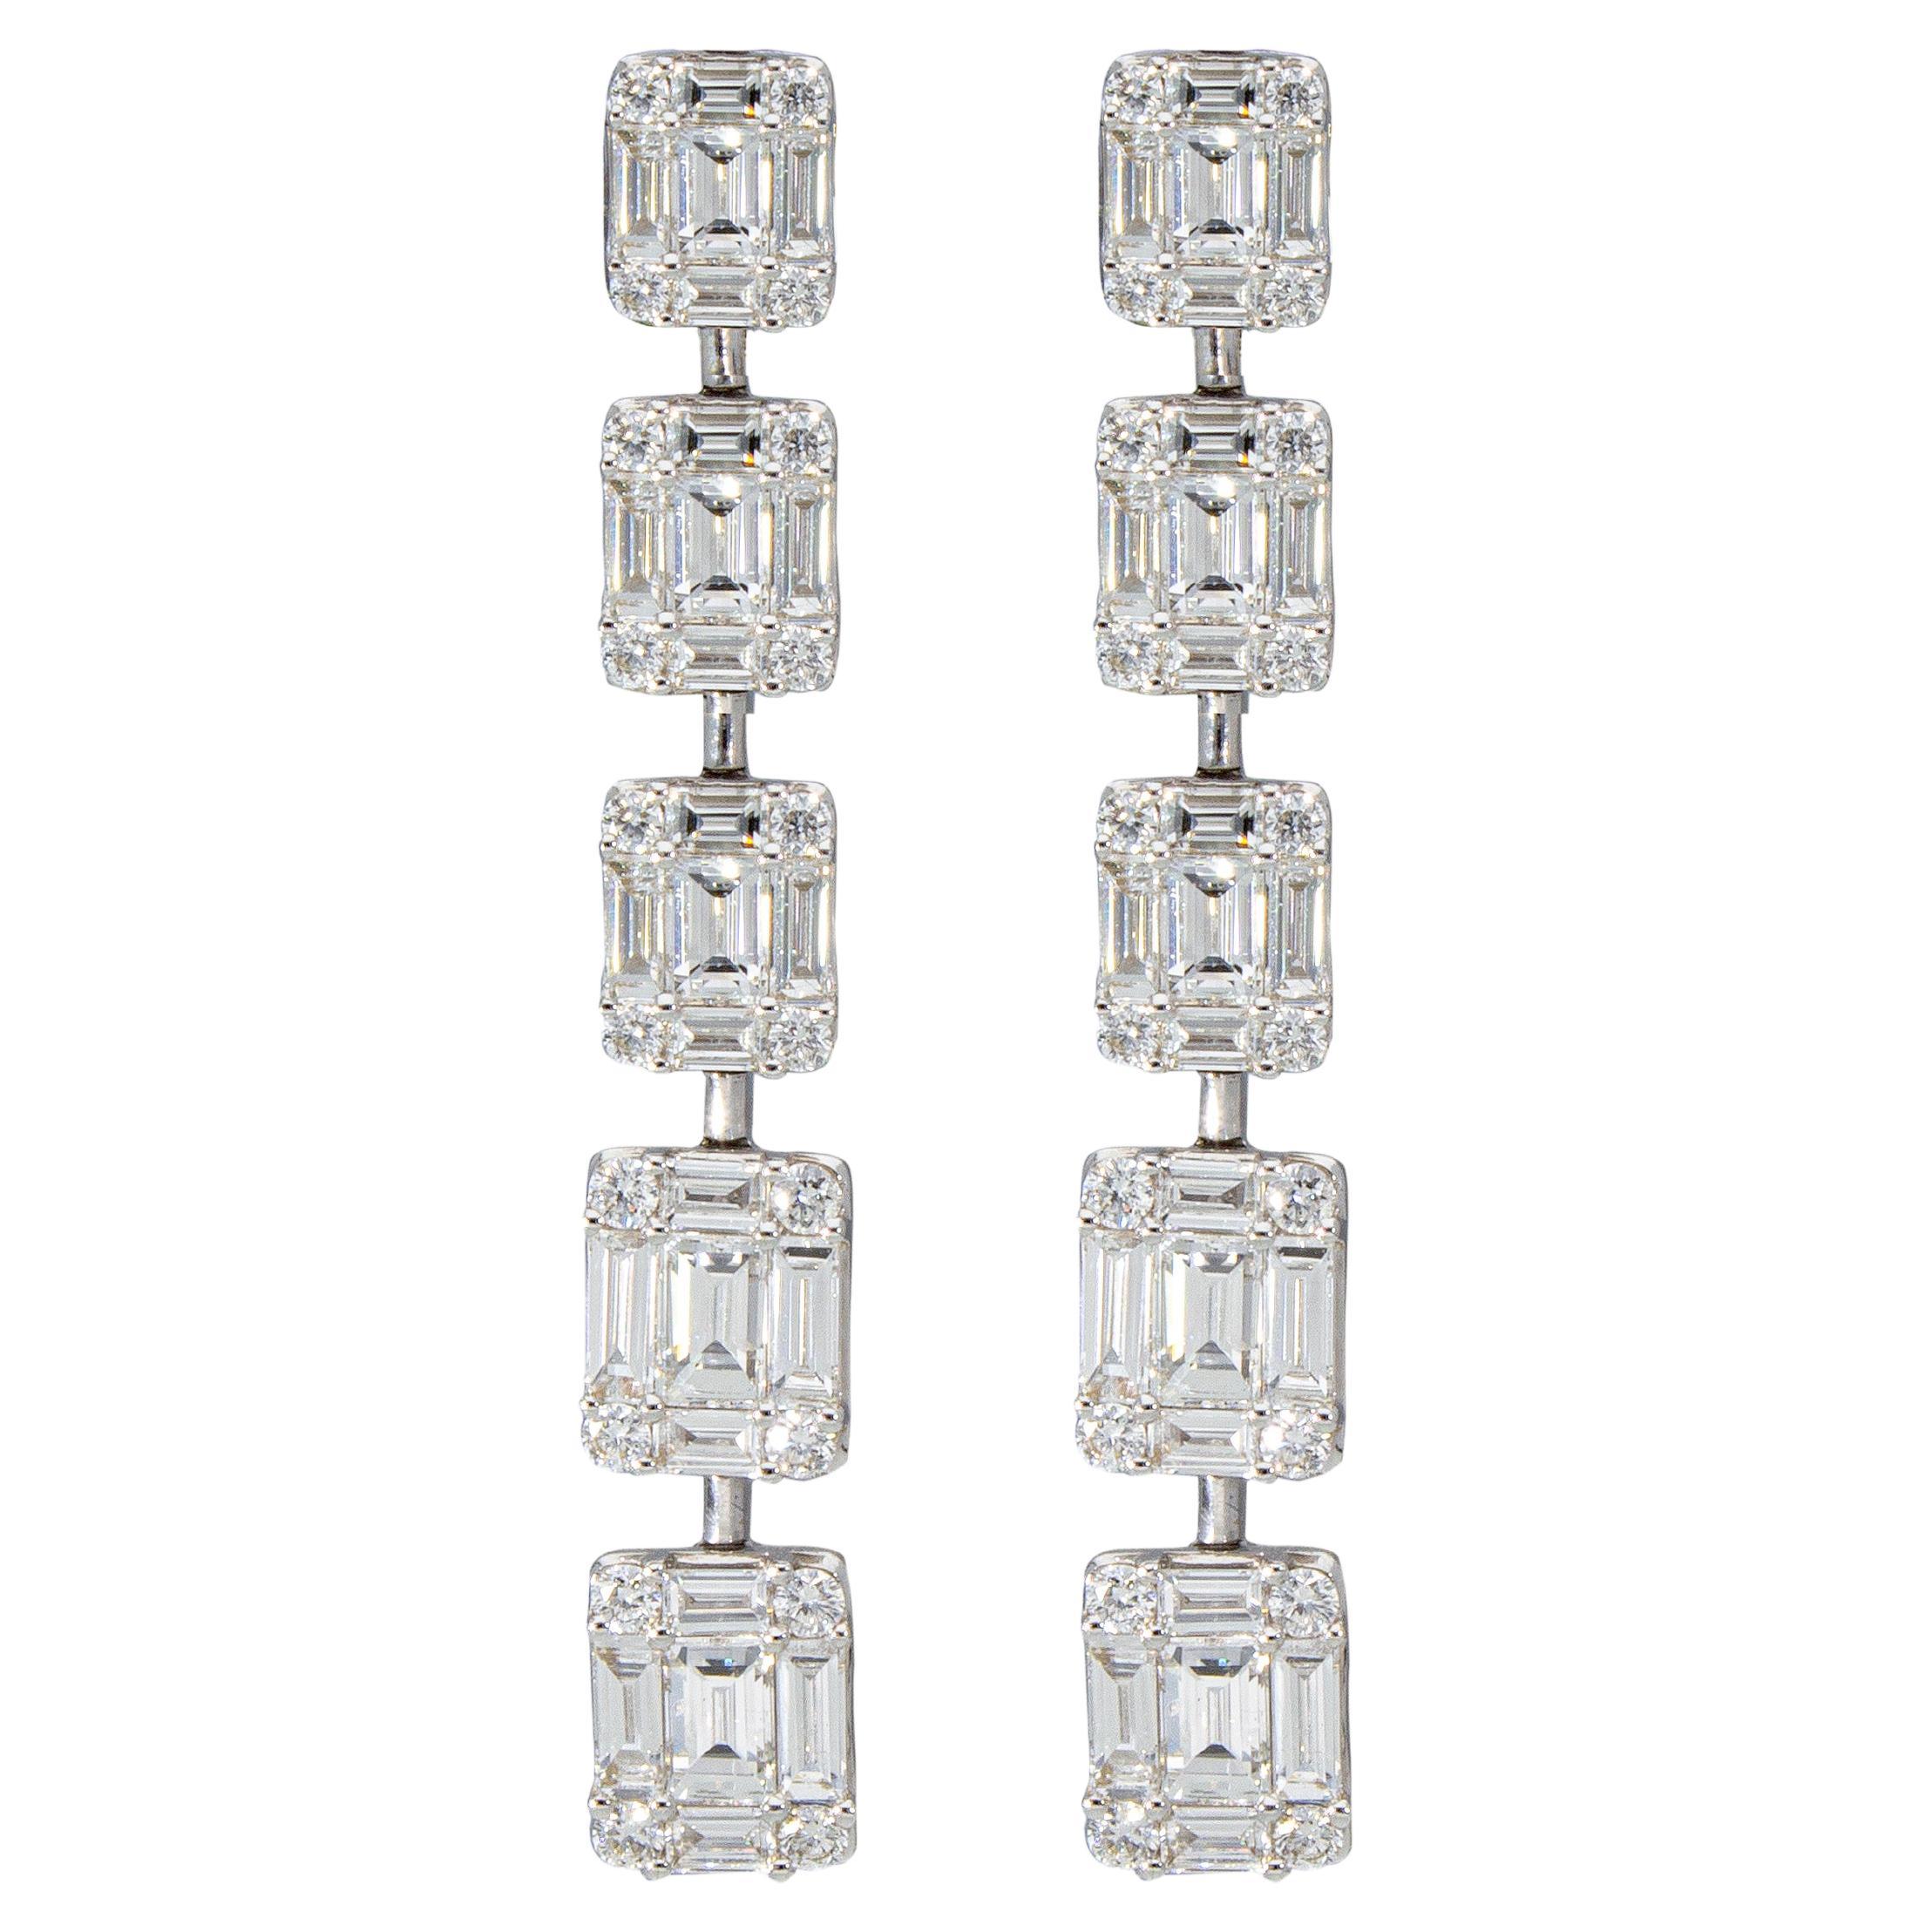 3.65 ct Drop Earrings of Diamonds, Diamond and Baguette Cut. 18 Kt White Gold